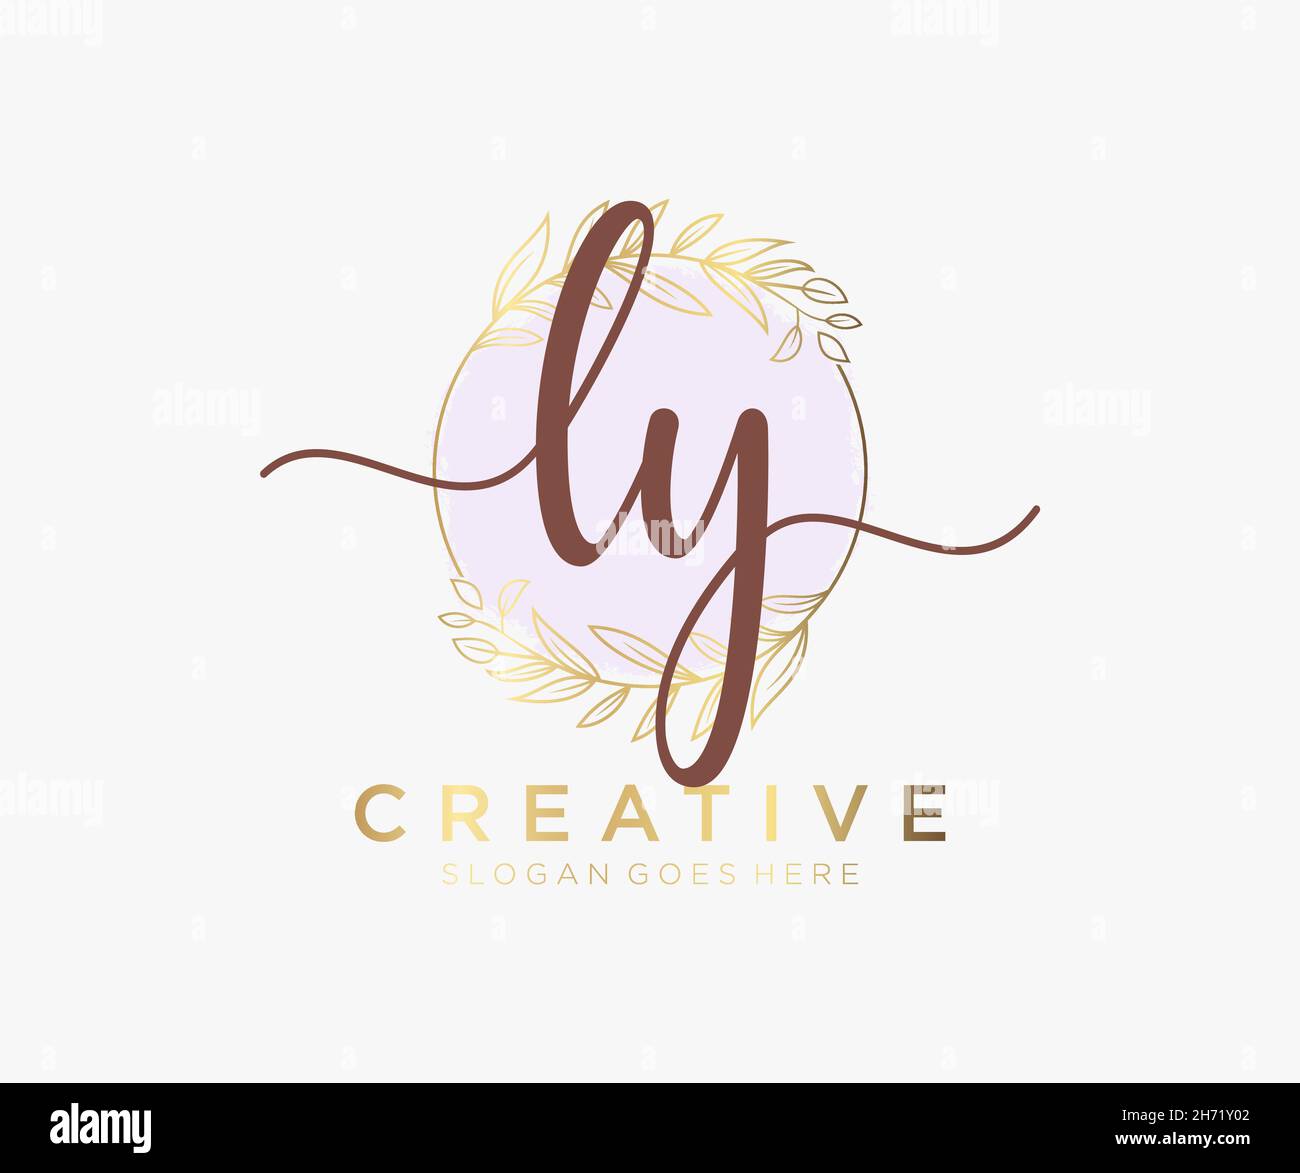 Ly logo Stock Vector Images - Alamy